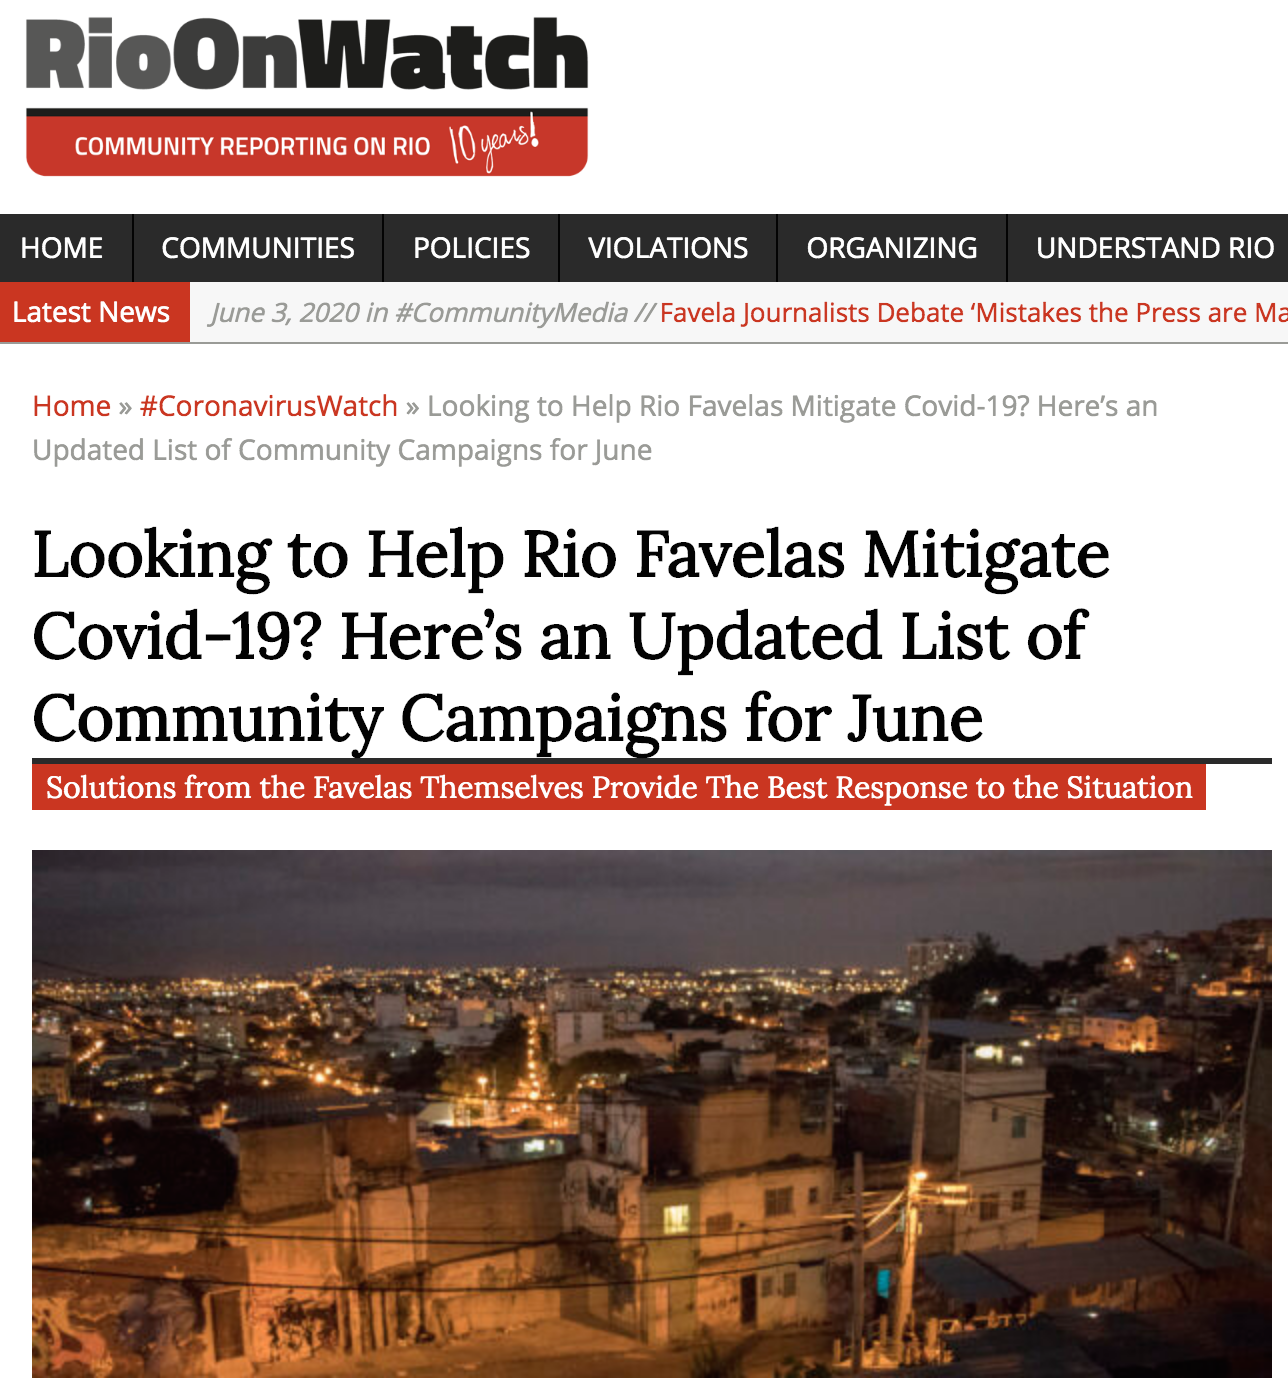 Comprehensive list of favela campaigns compiled by RioOnWatch